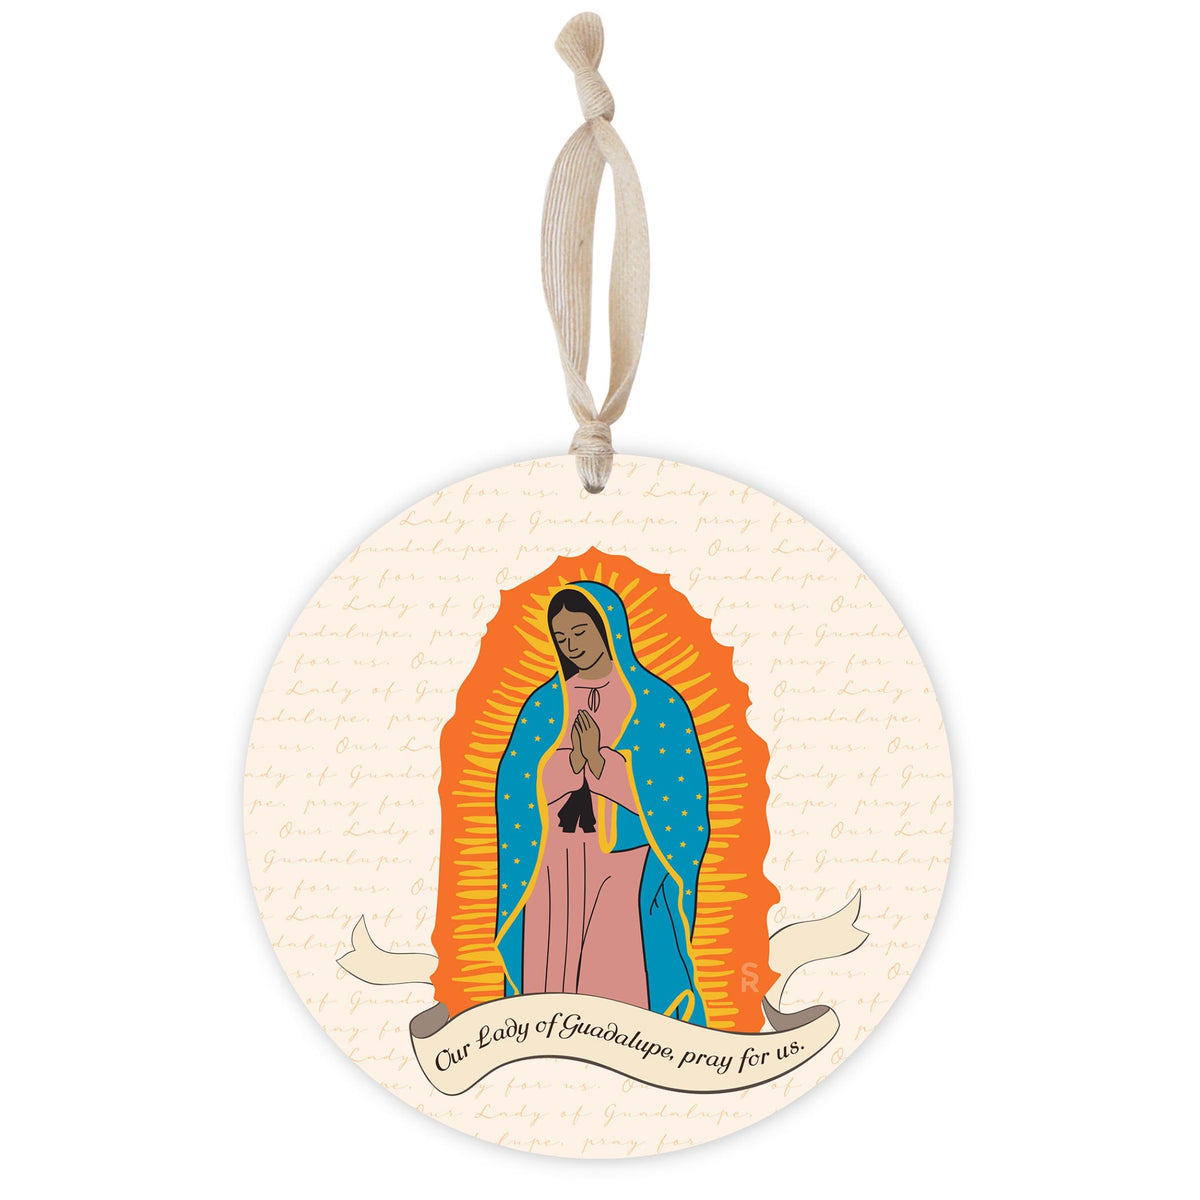 Our Lady of Guadalupe 8 inch Ornament